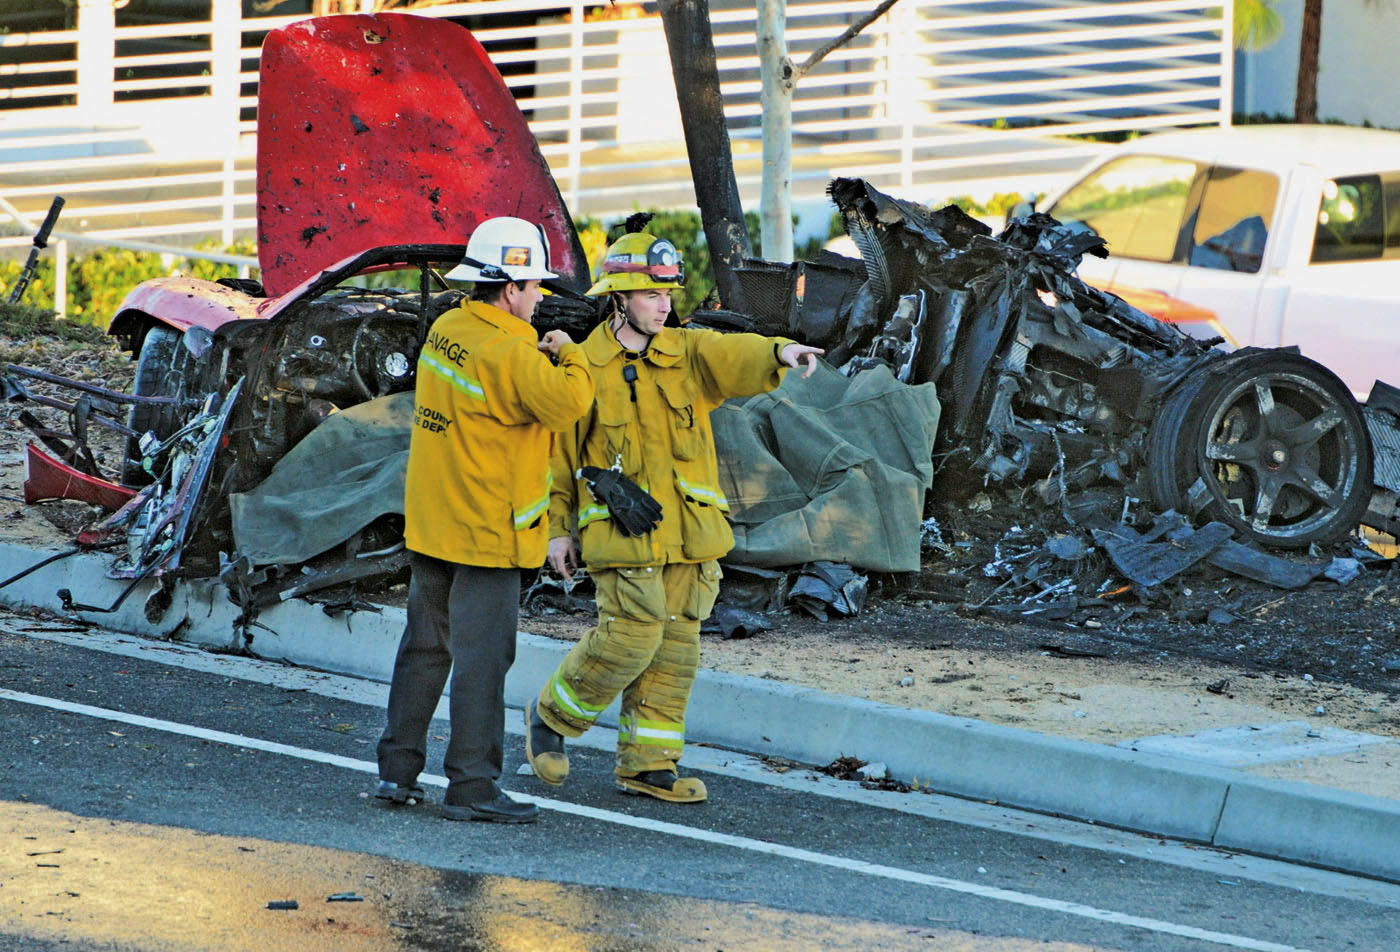 Sheriff's deputies work near the wreckage of a Porsche that crashed into a light pole on Hercules Street near Kelly Johnson Parkway in Valencia, Calif., in this Nov. 30 photo.